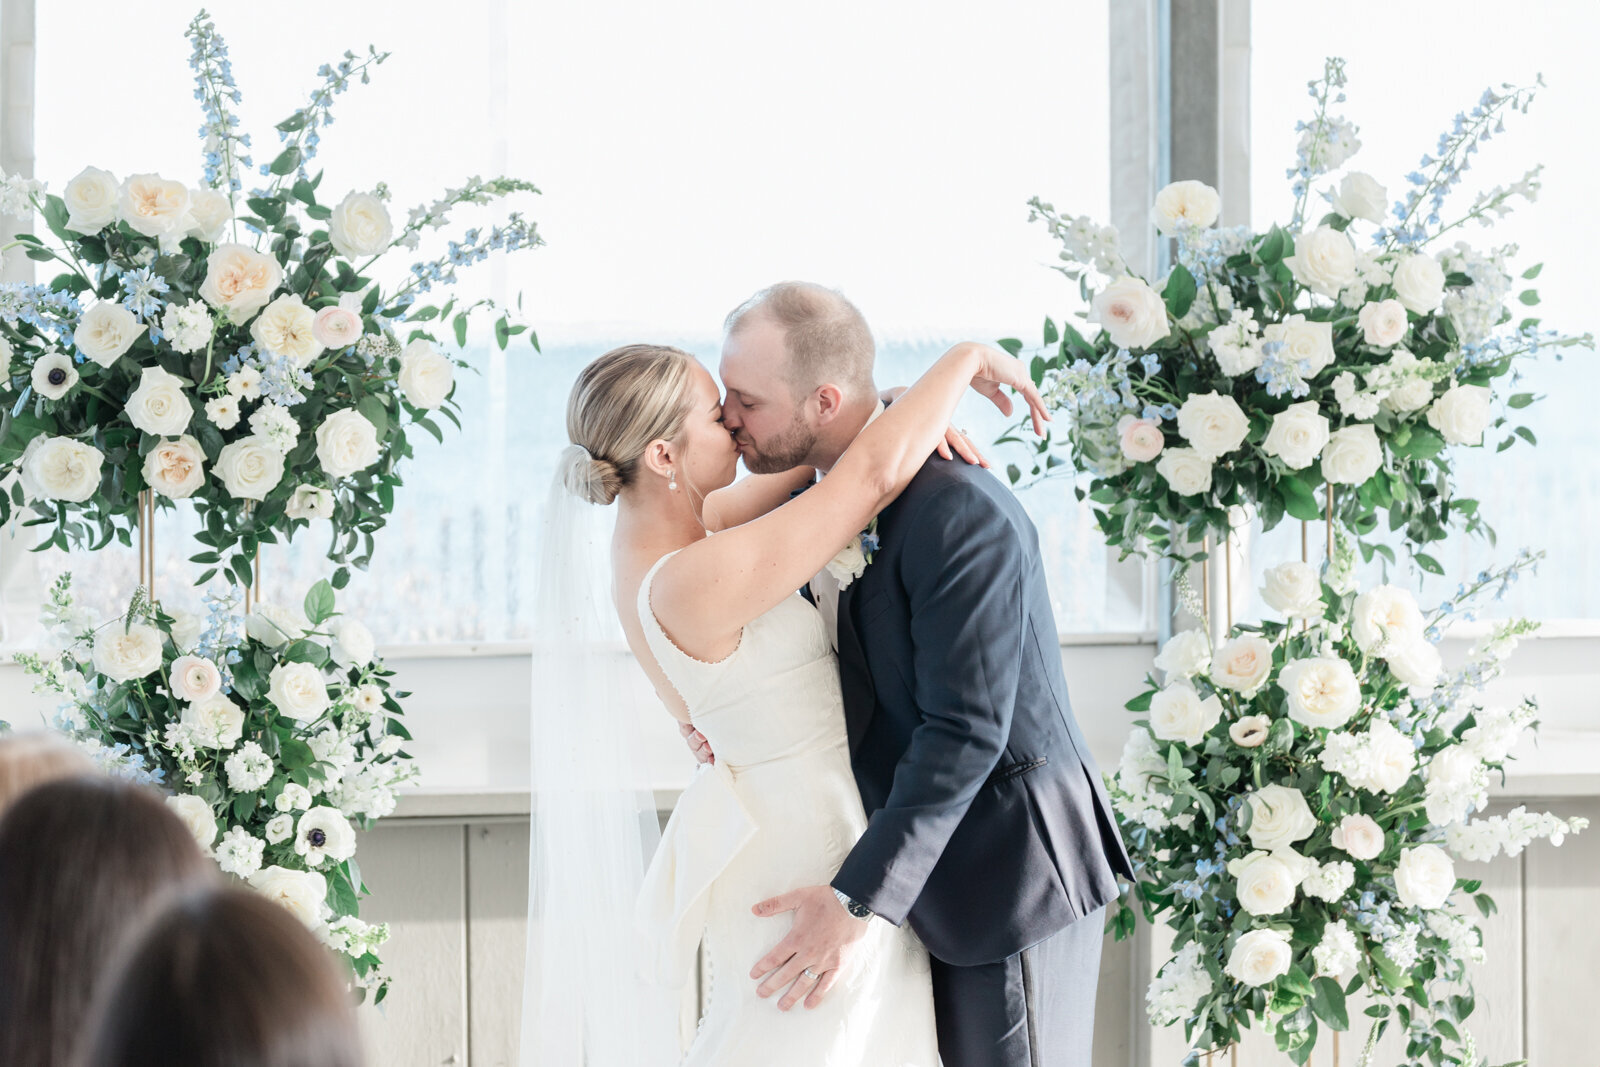 Newlyweds share their first kiss during their Cape Cod wedding.